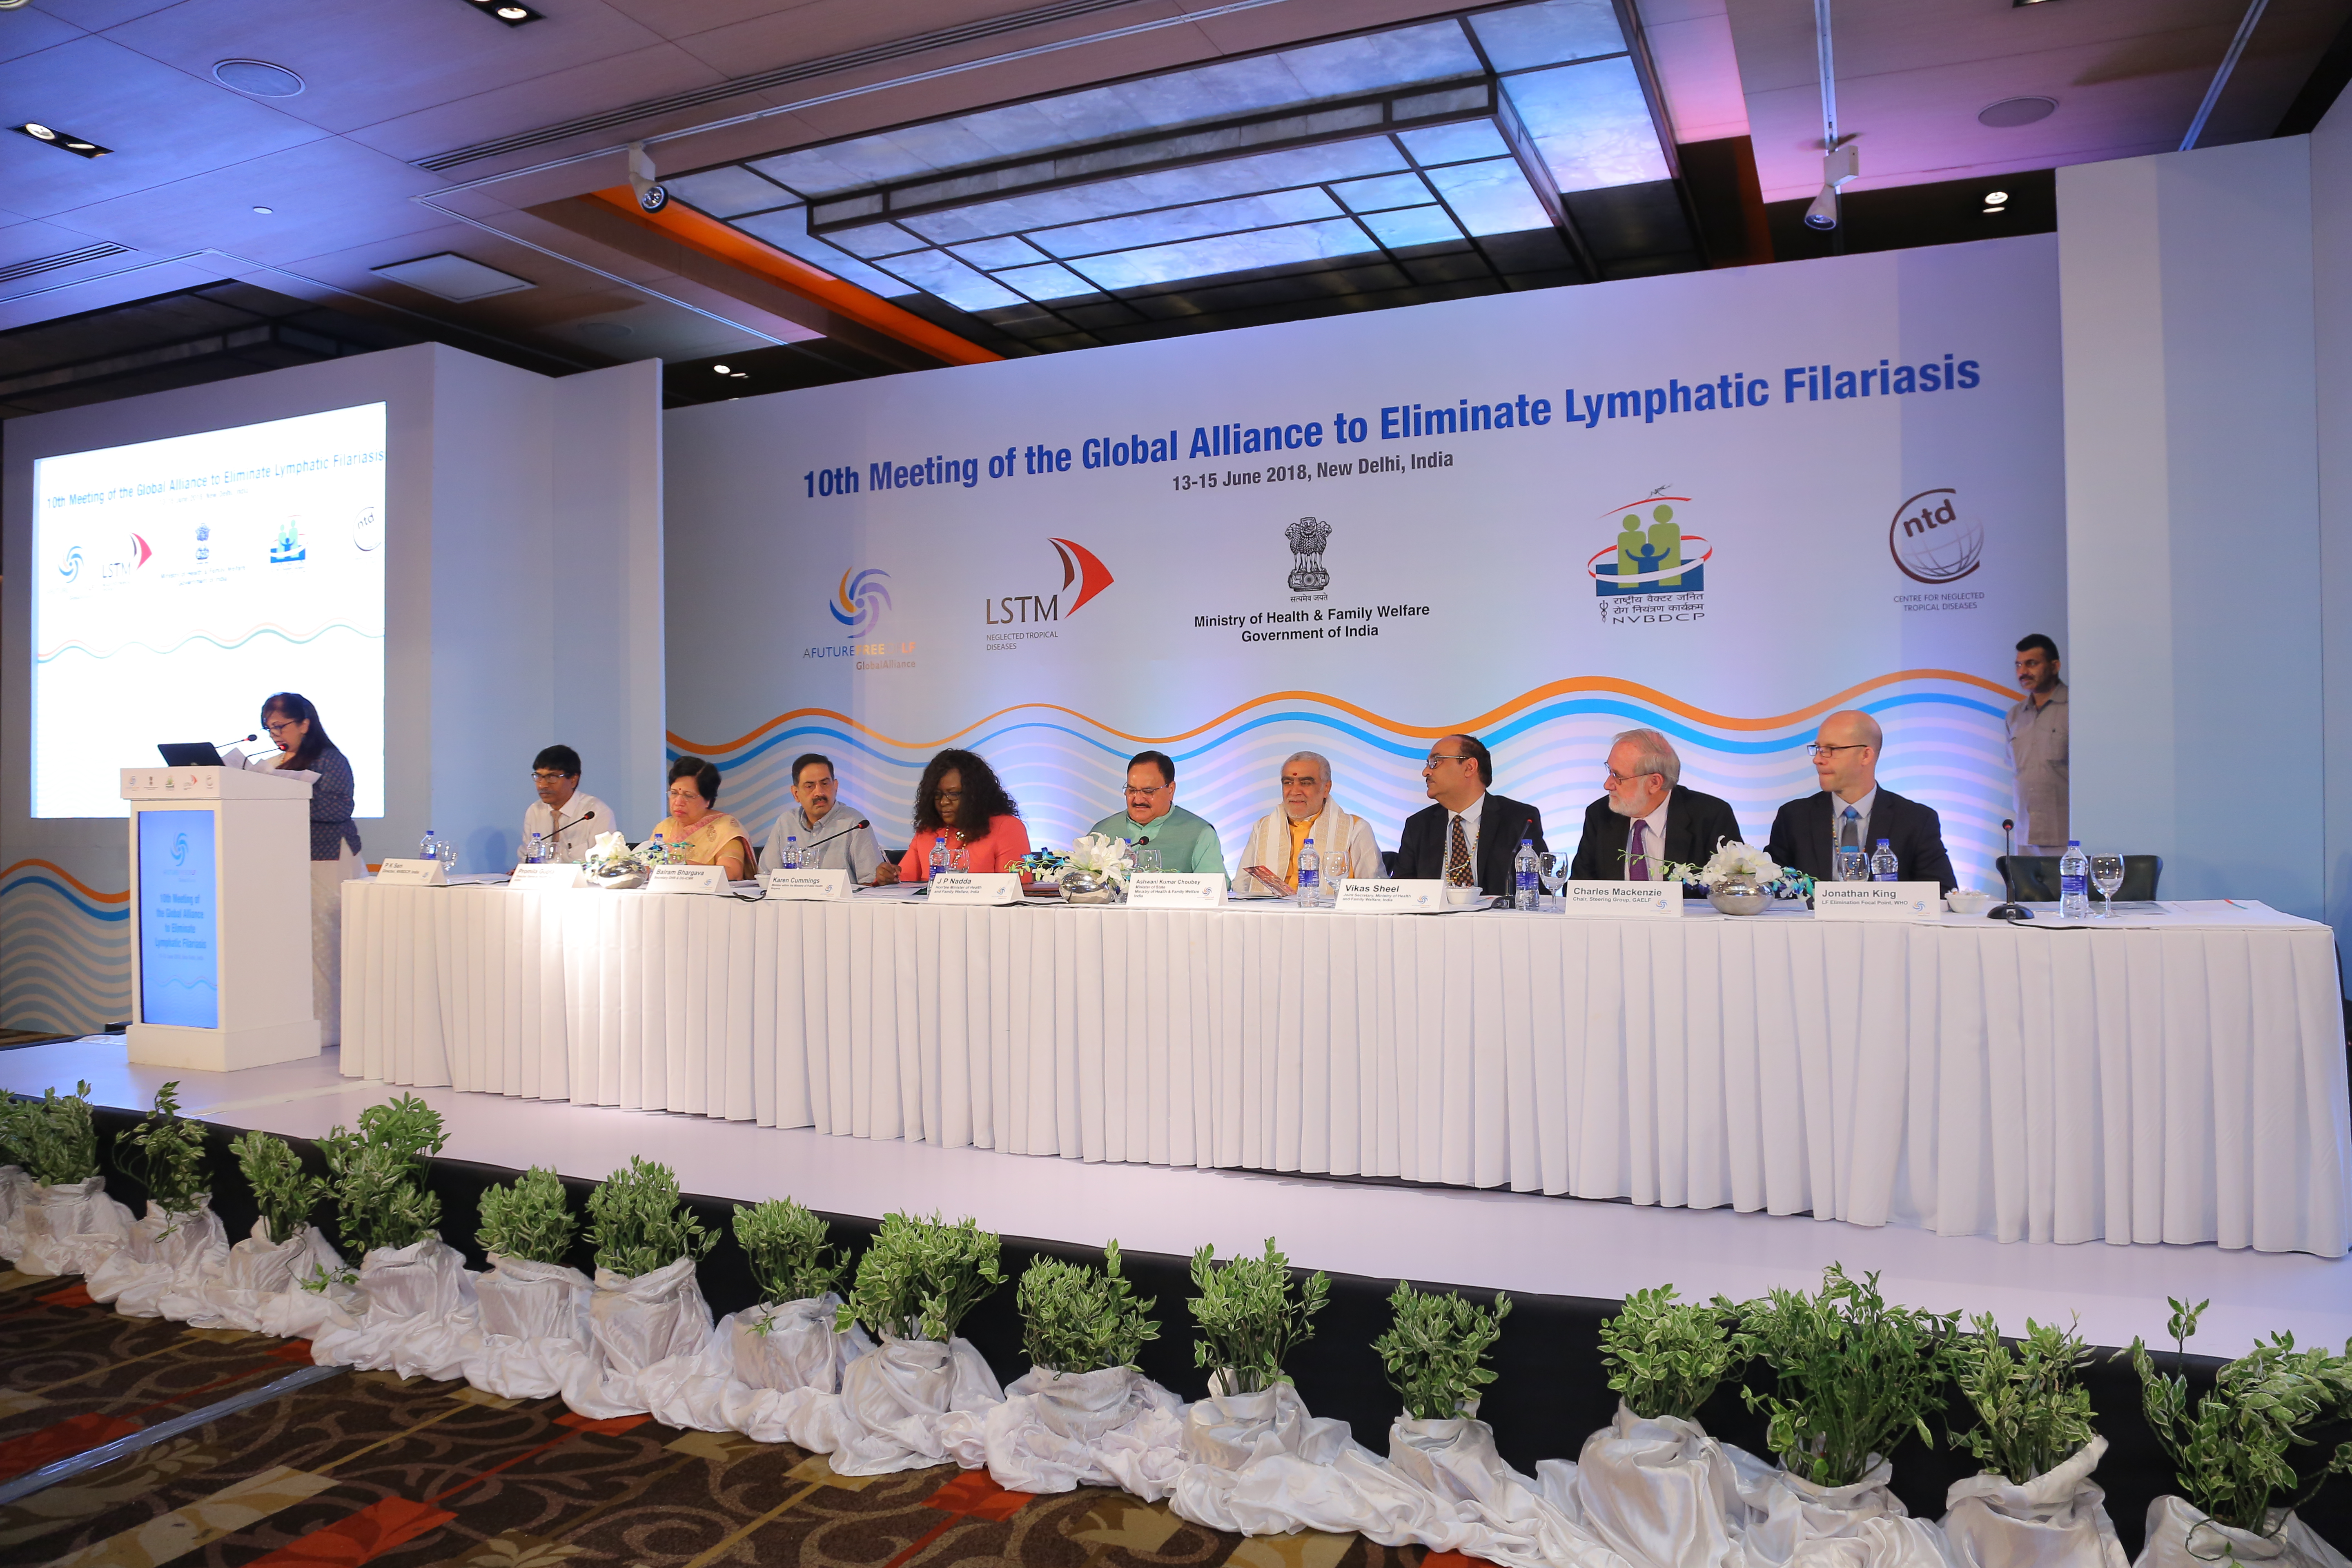 10th Meeting of the Global Alliance to Eliminate Lymphatic Filariasis 13-15 June 2018 at New Delhi